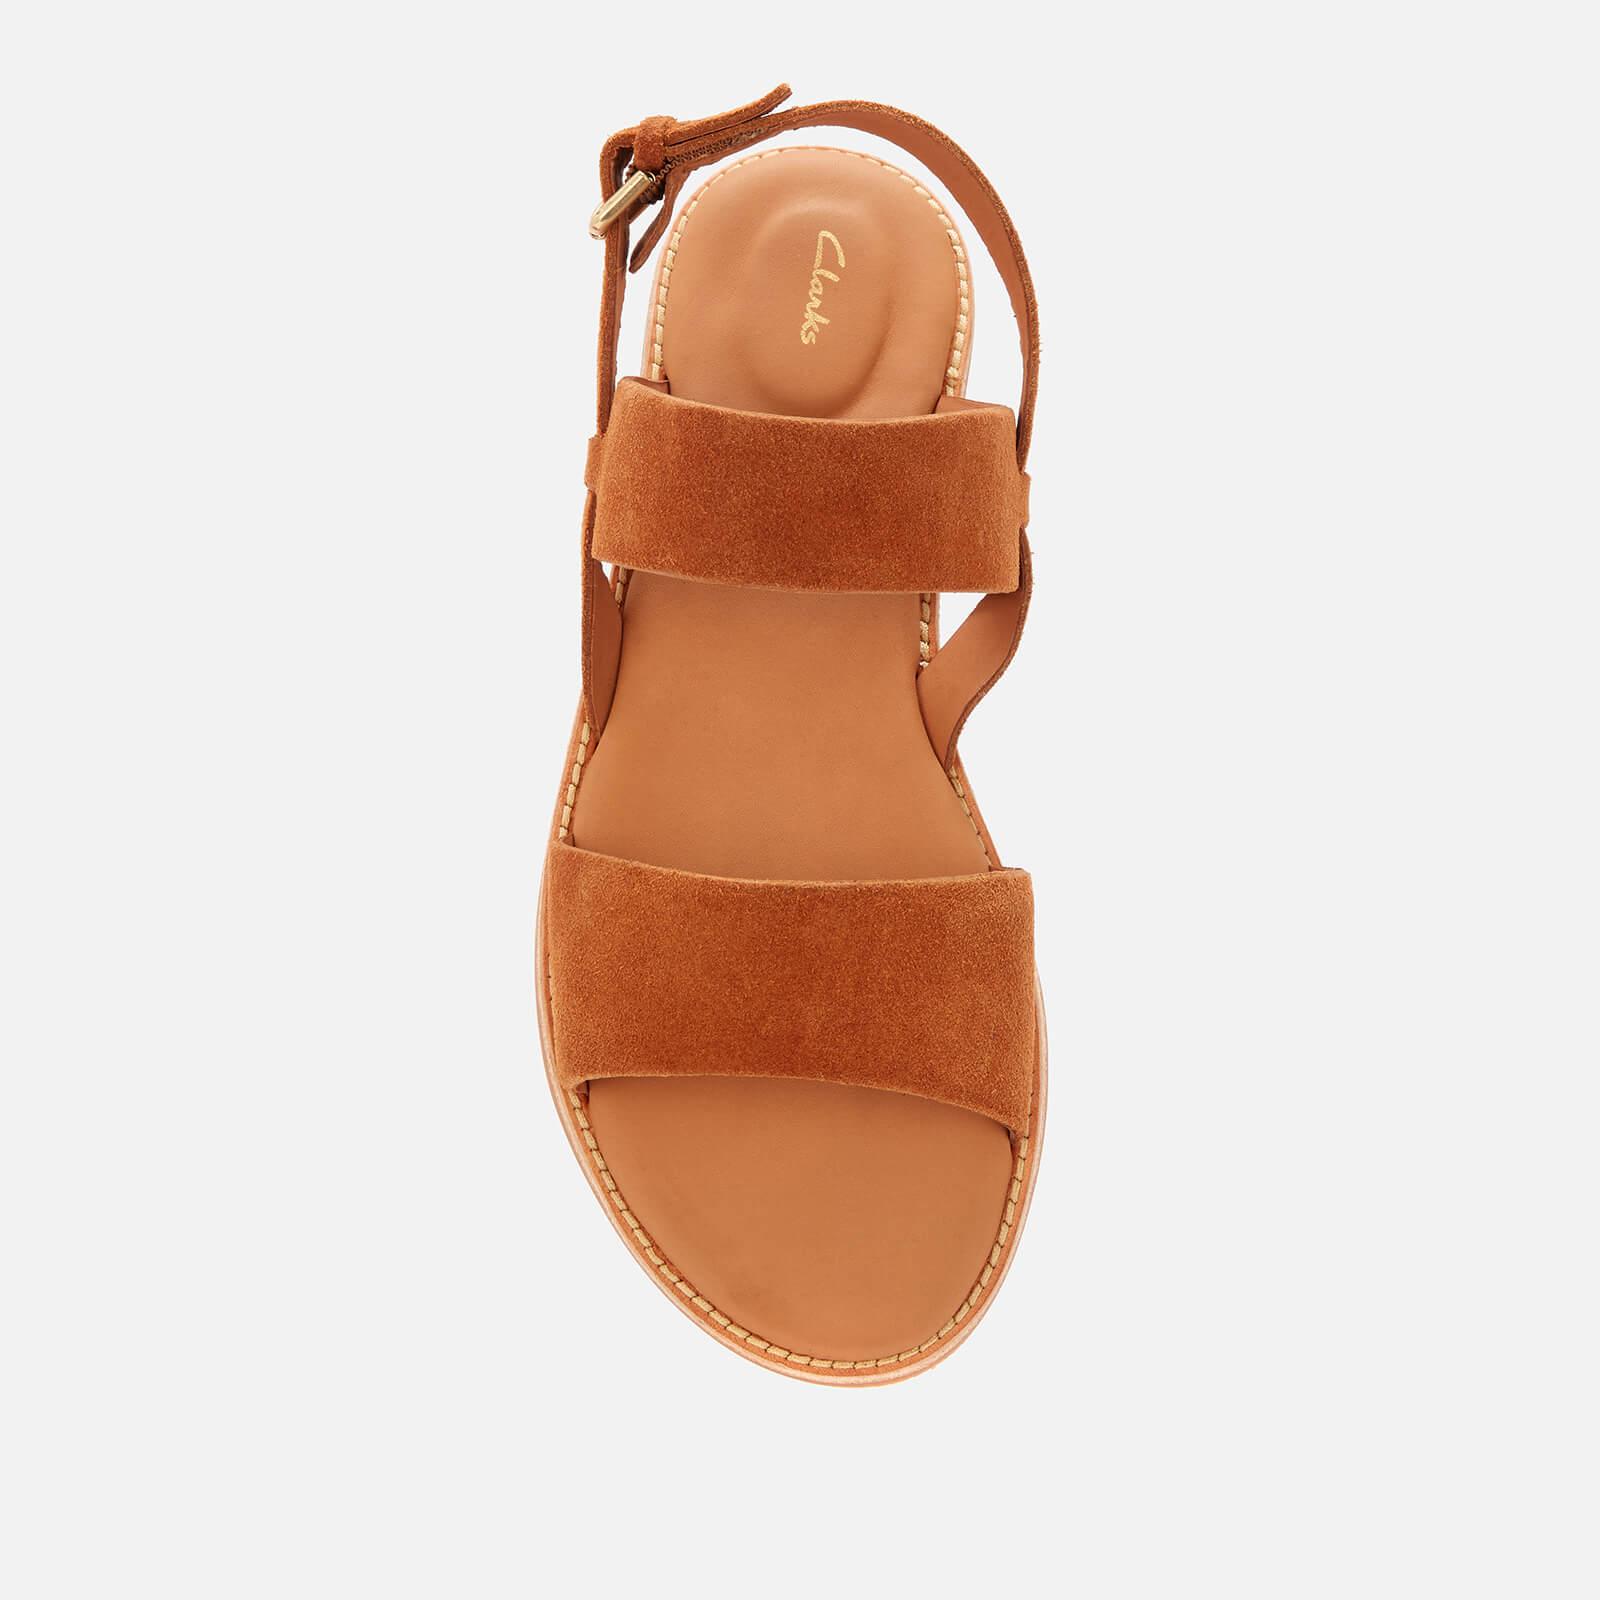 Clarks Karsea Strap Leather Flat Sandals in Tan (Brown) | Lyst